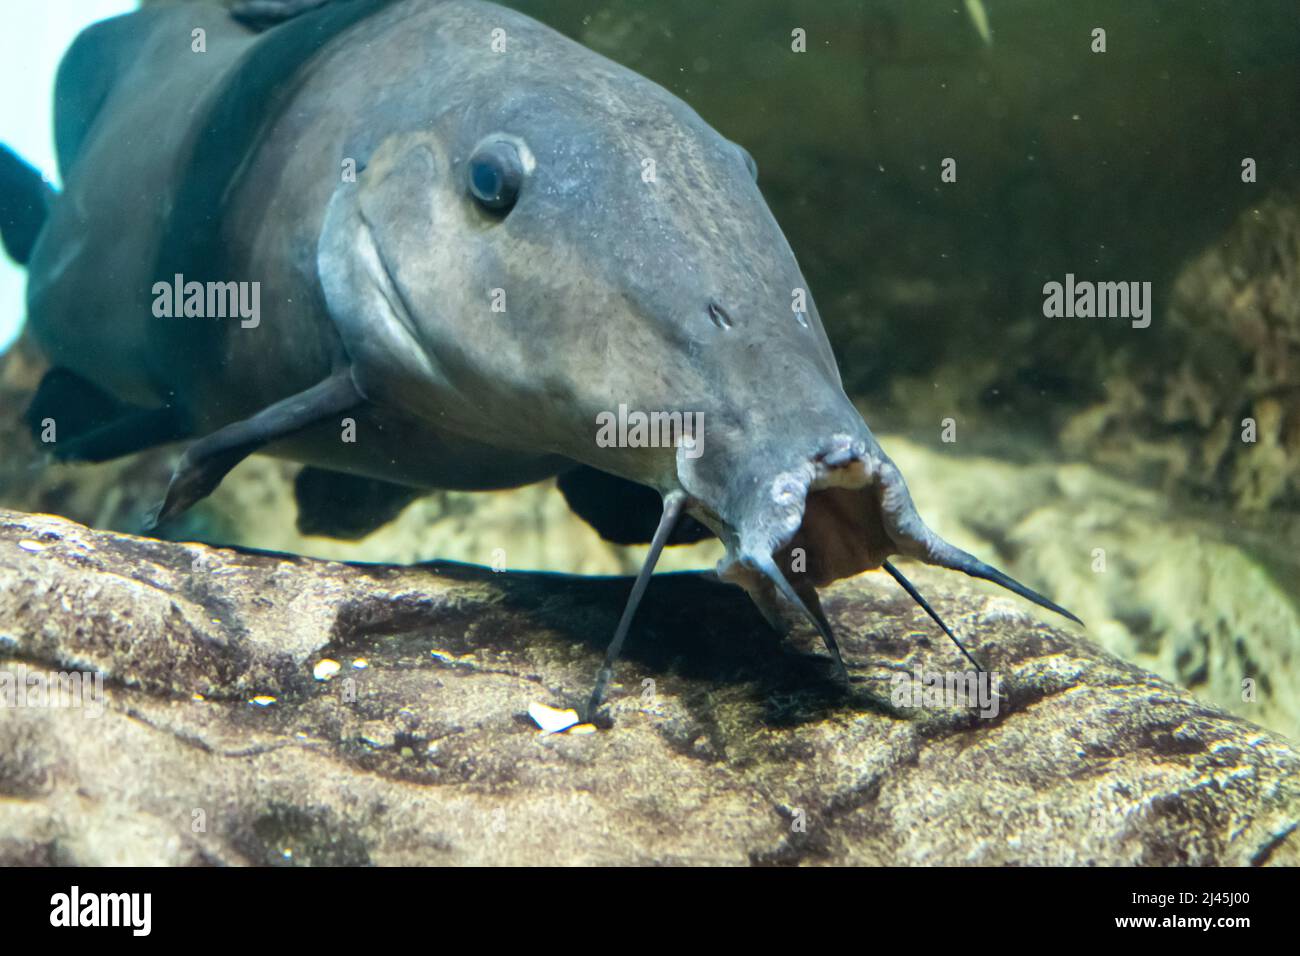 The giraffe catfish (Auchenoglanis occidentalis) is an African catfish. It eats plants off the floor of lakes and streams. It is found throughout Stock Photo